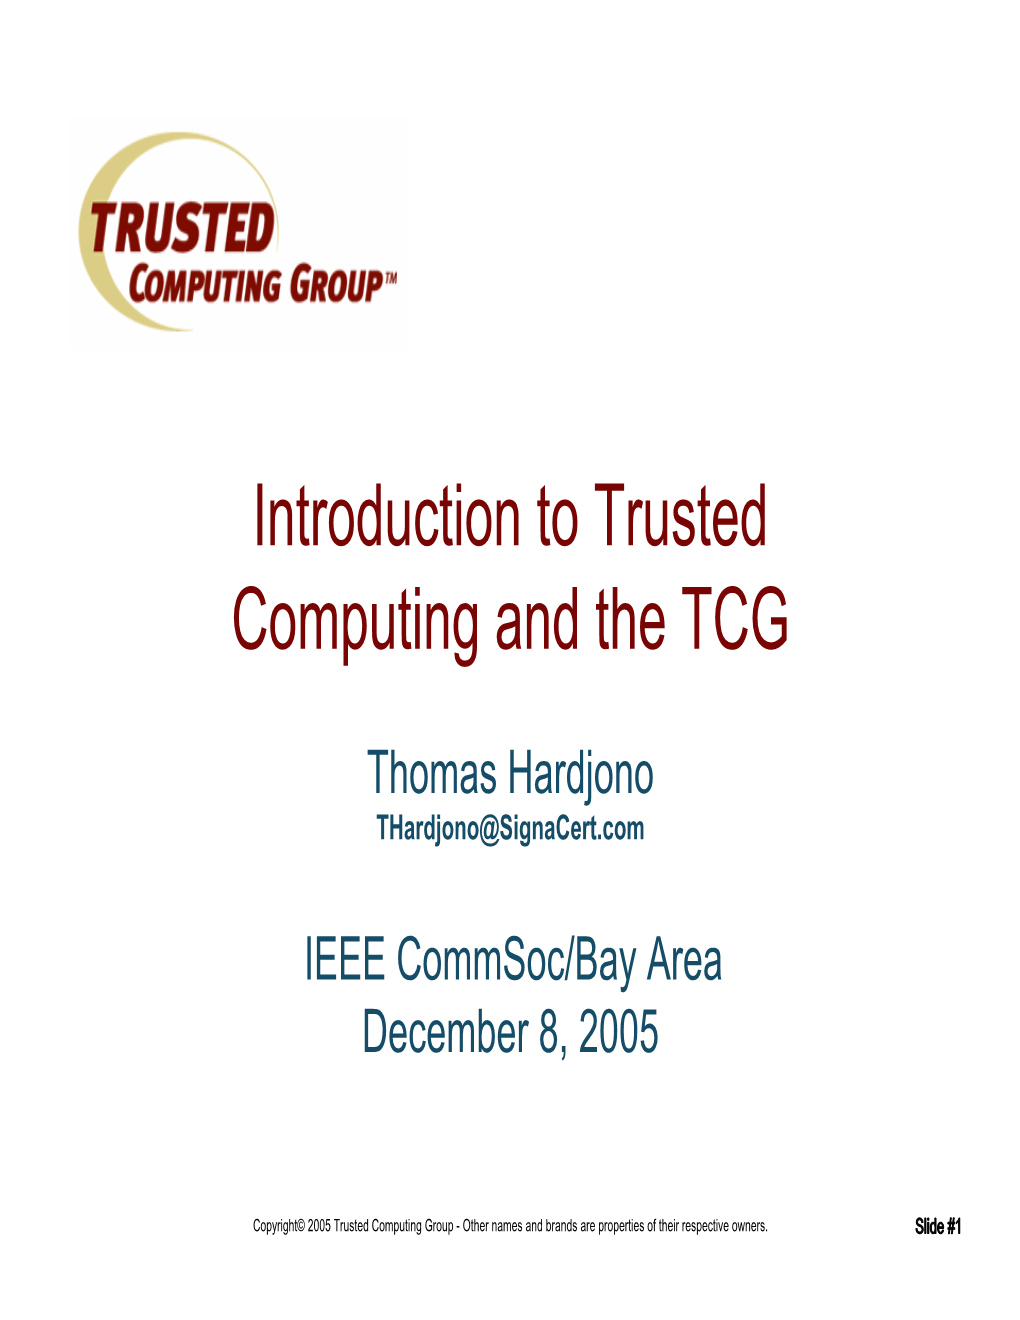 Introduction to Trusted Computing and the TCG